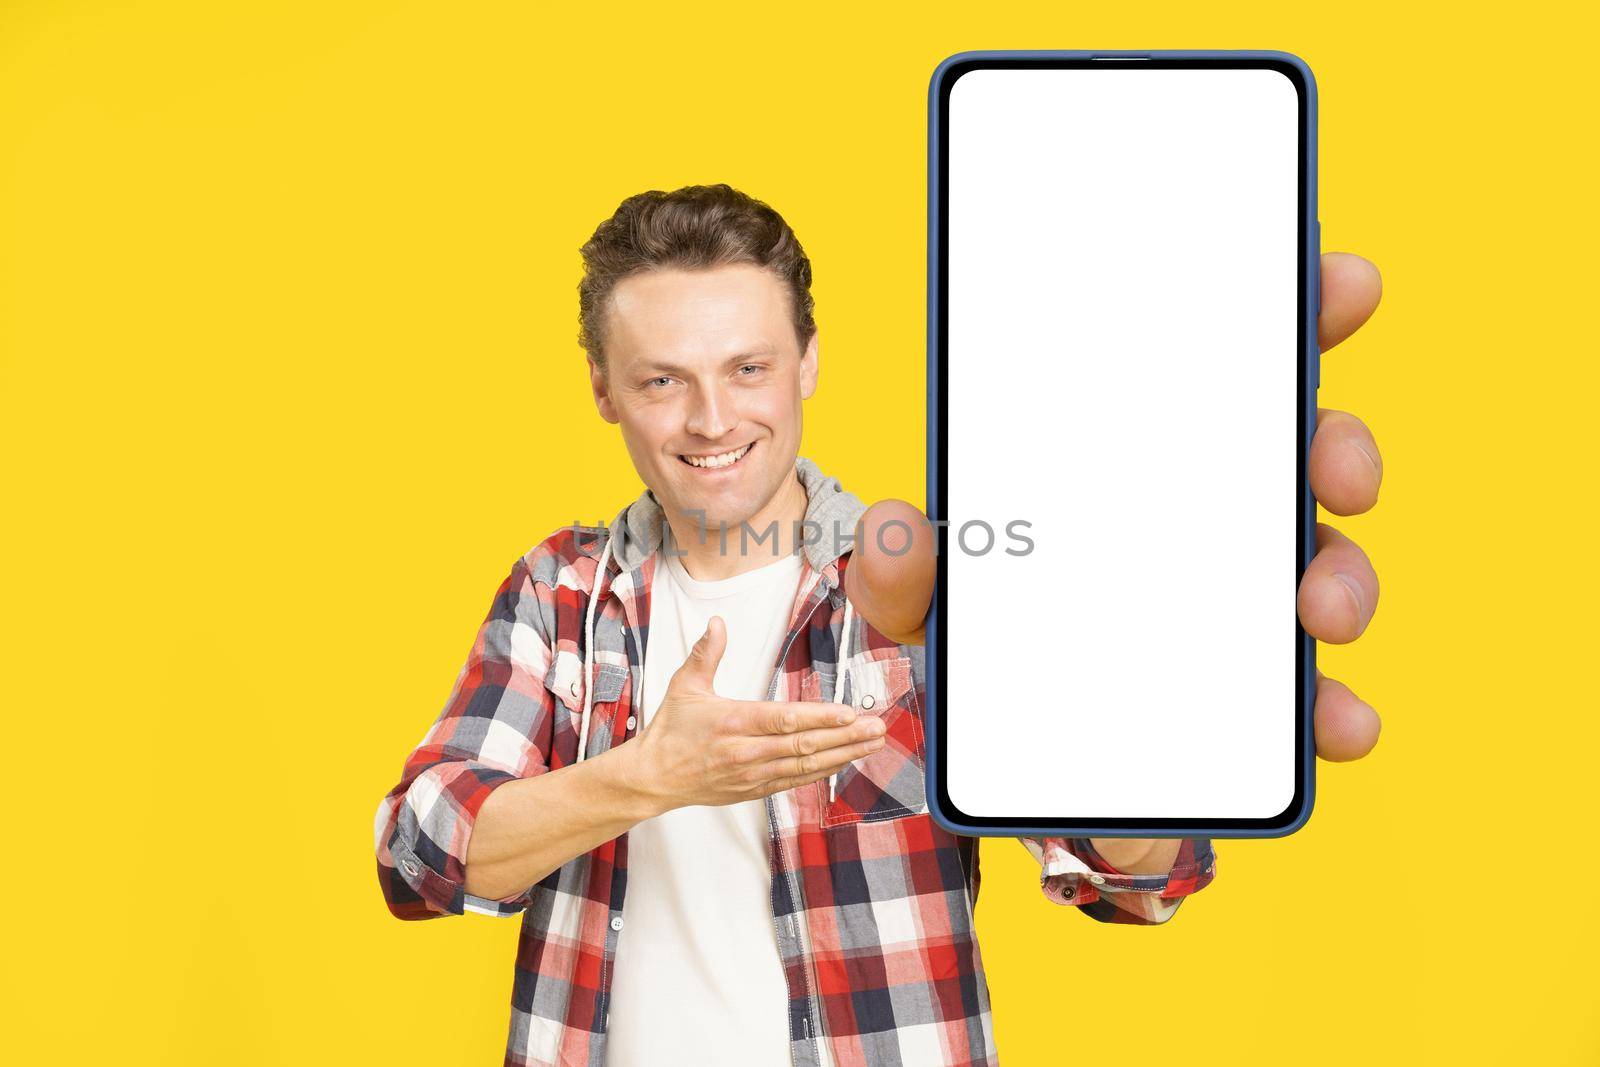 Introducing new app happy holding giant, huge smartphone with white screen blond man, wearing red plaid shirt. Man with phone display mock up isolated on yellow background. Mobile app advertisement.